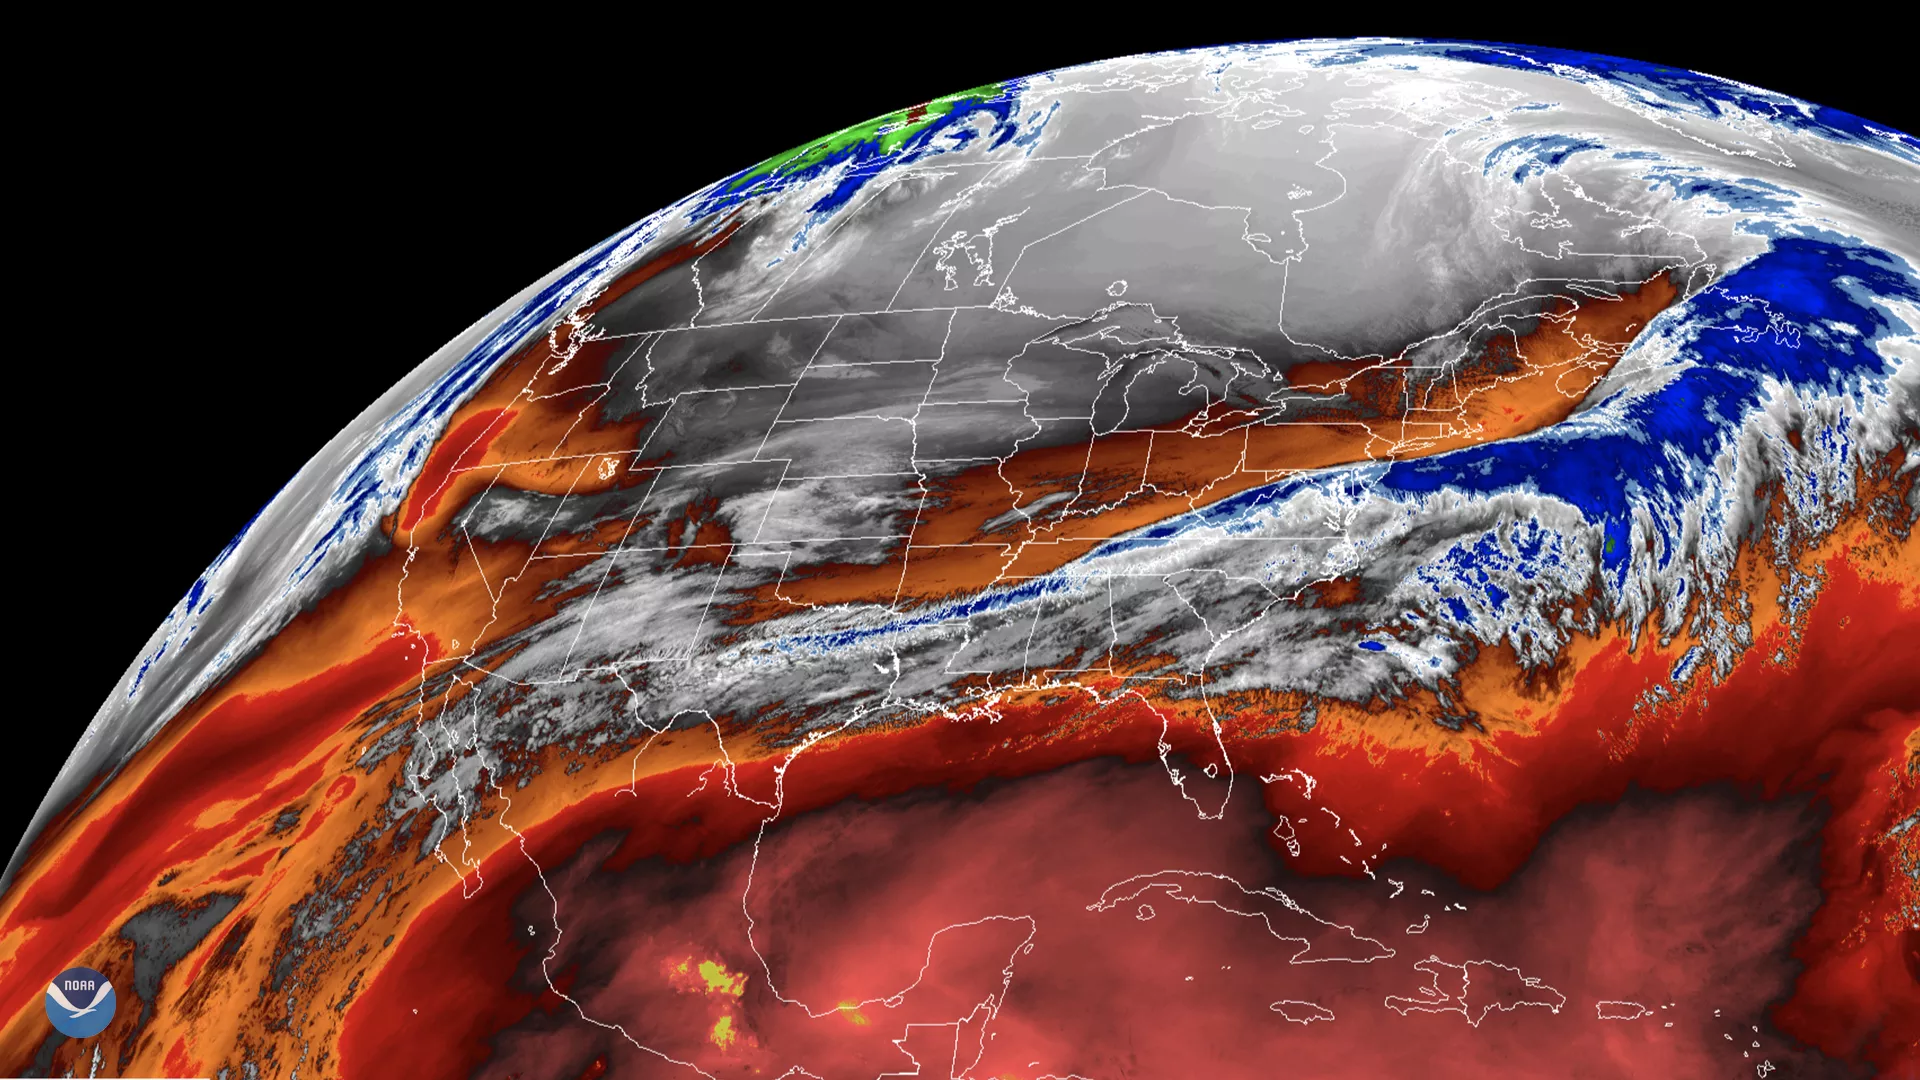 GOES East limb view of an atmospheric river over the United States